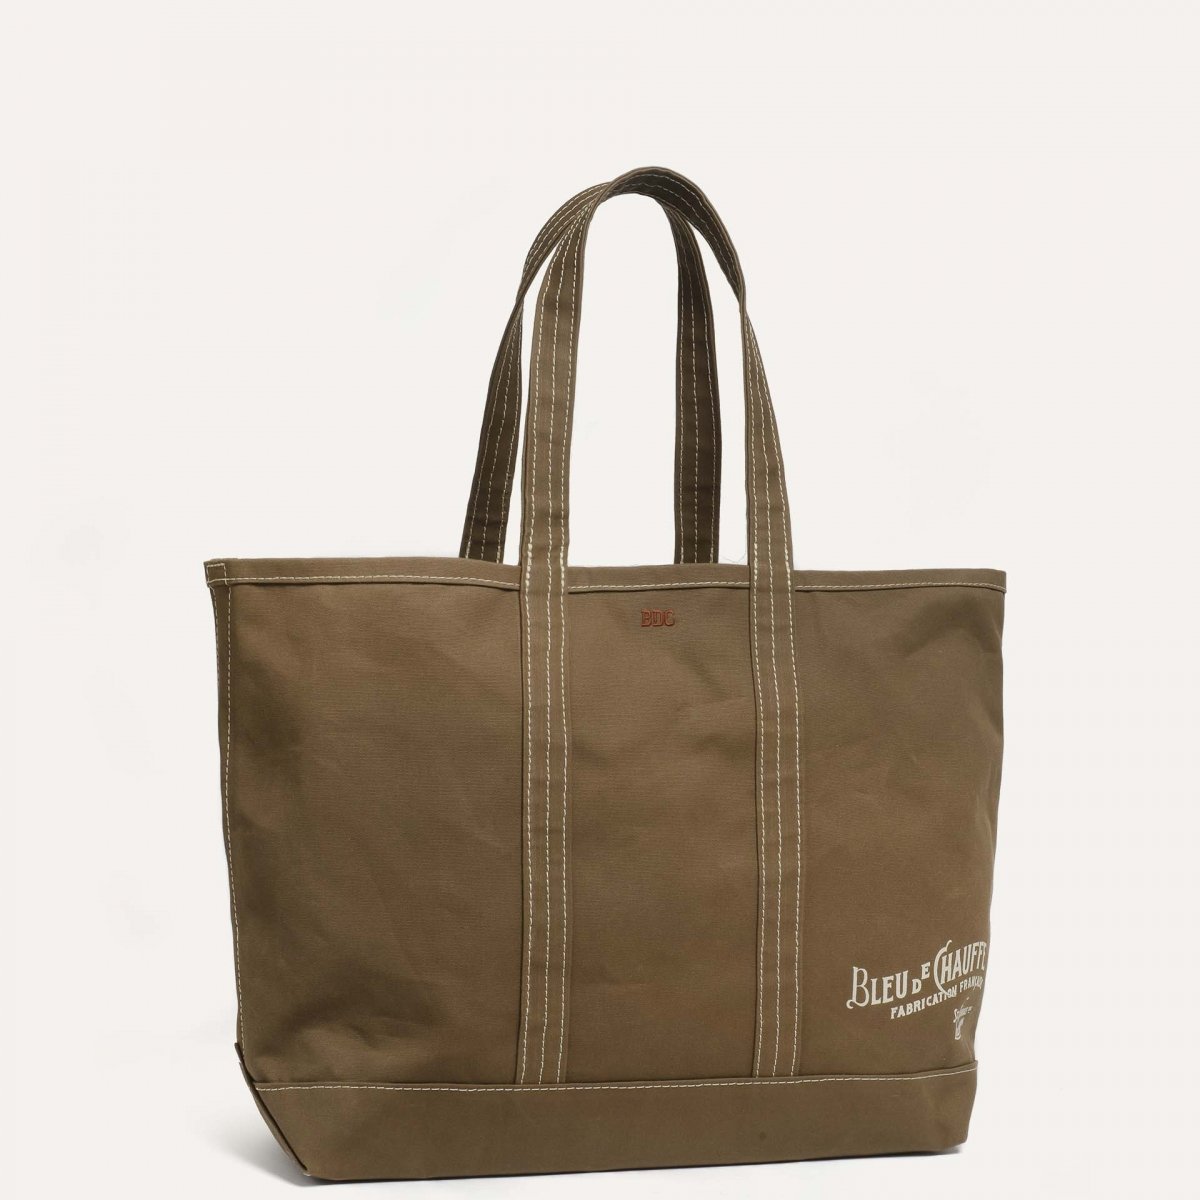 Labor Day Tote - Camel (image n°3)